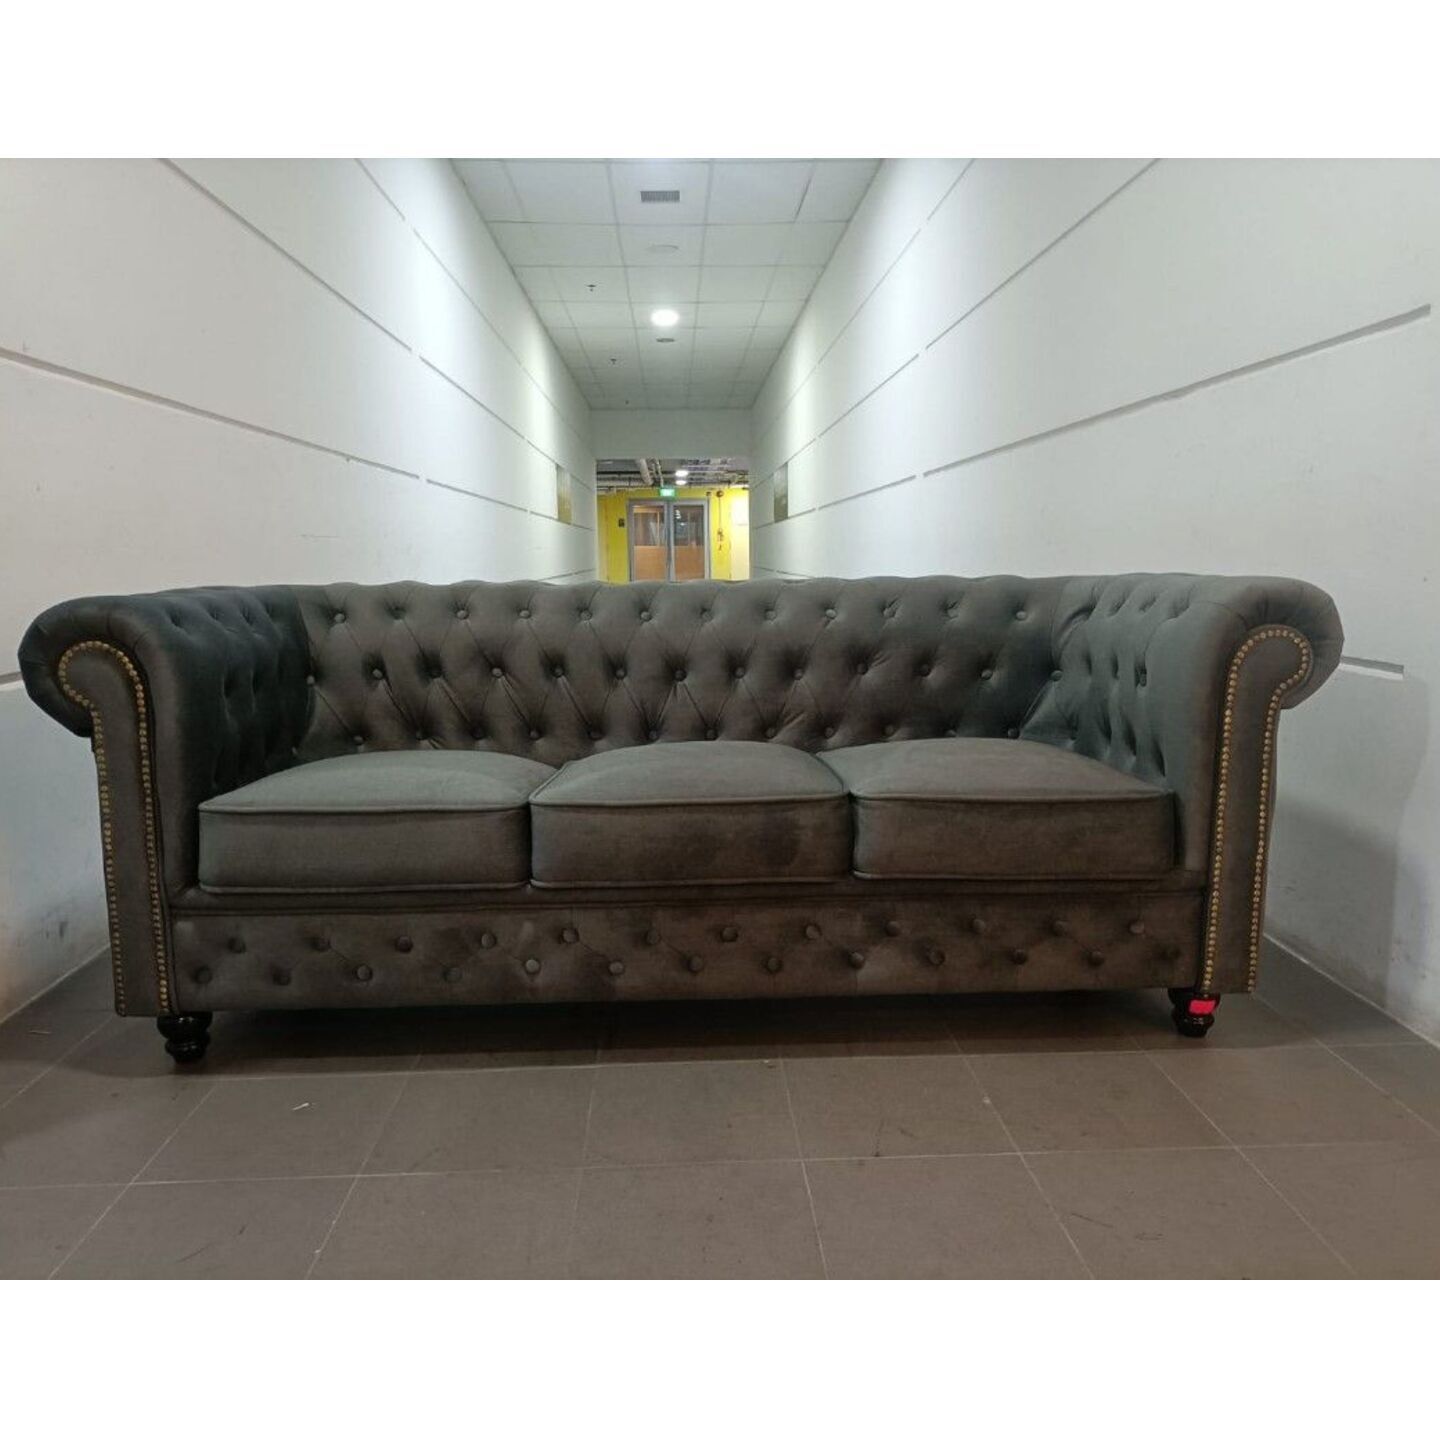 CAT FRIENDLY SALVADORE X 3 Seater Chesterfield Sofa in IRON GREY TECH VELVET 50509-P13